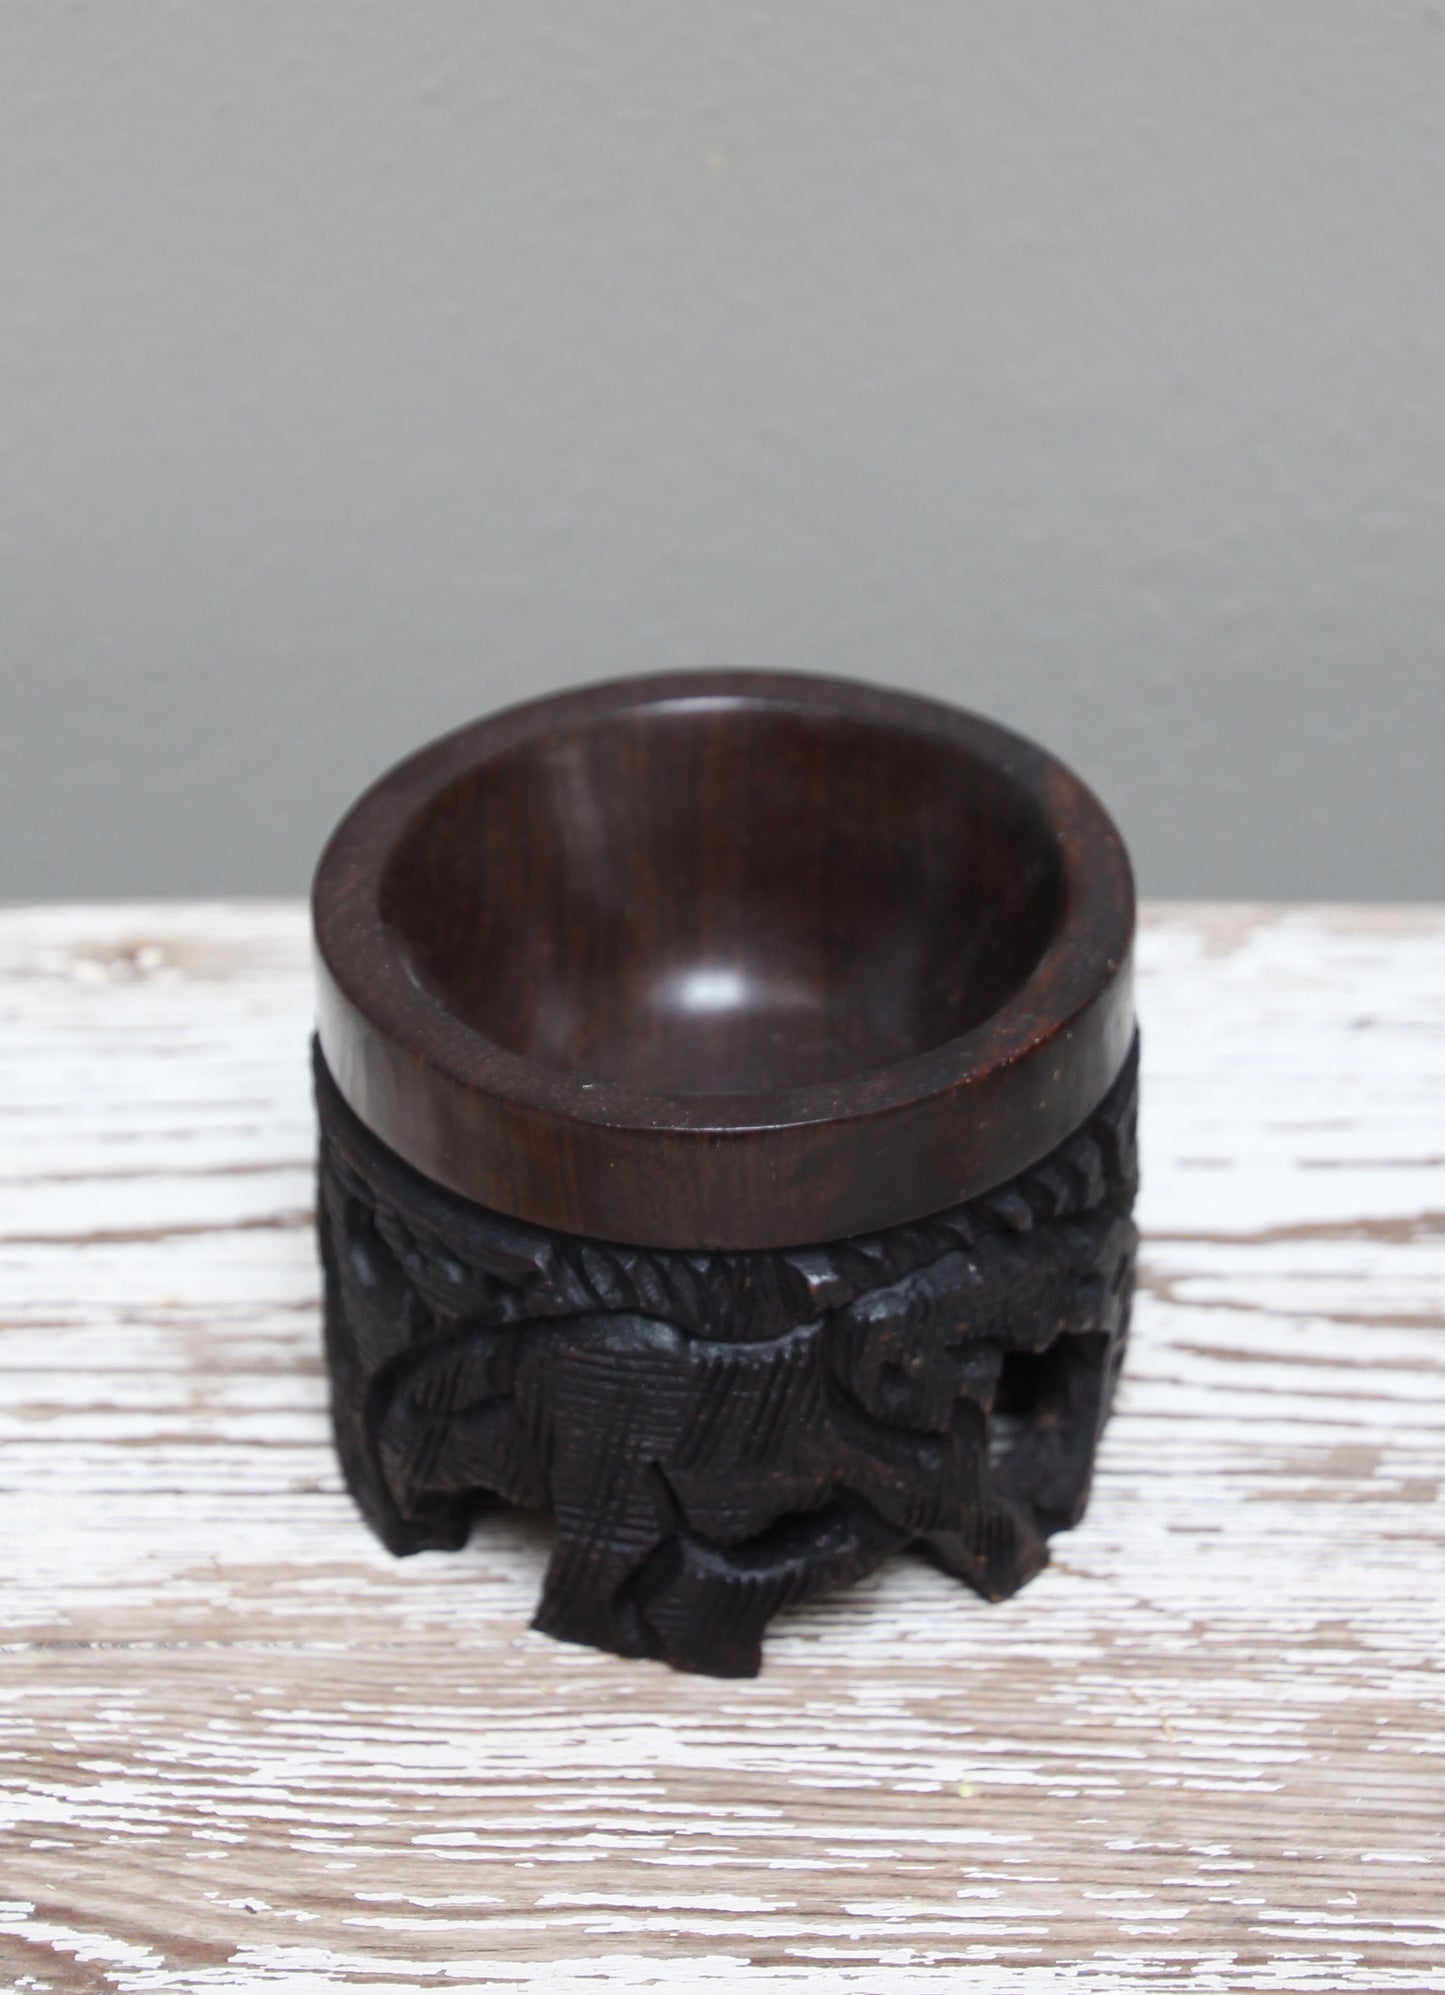 Ebony carved wooden egg stand